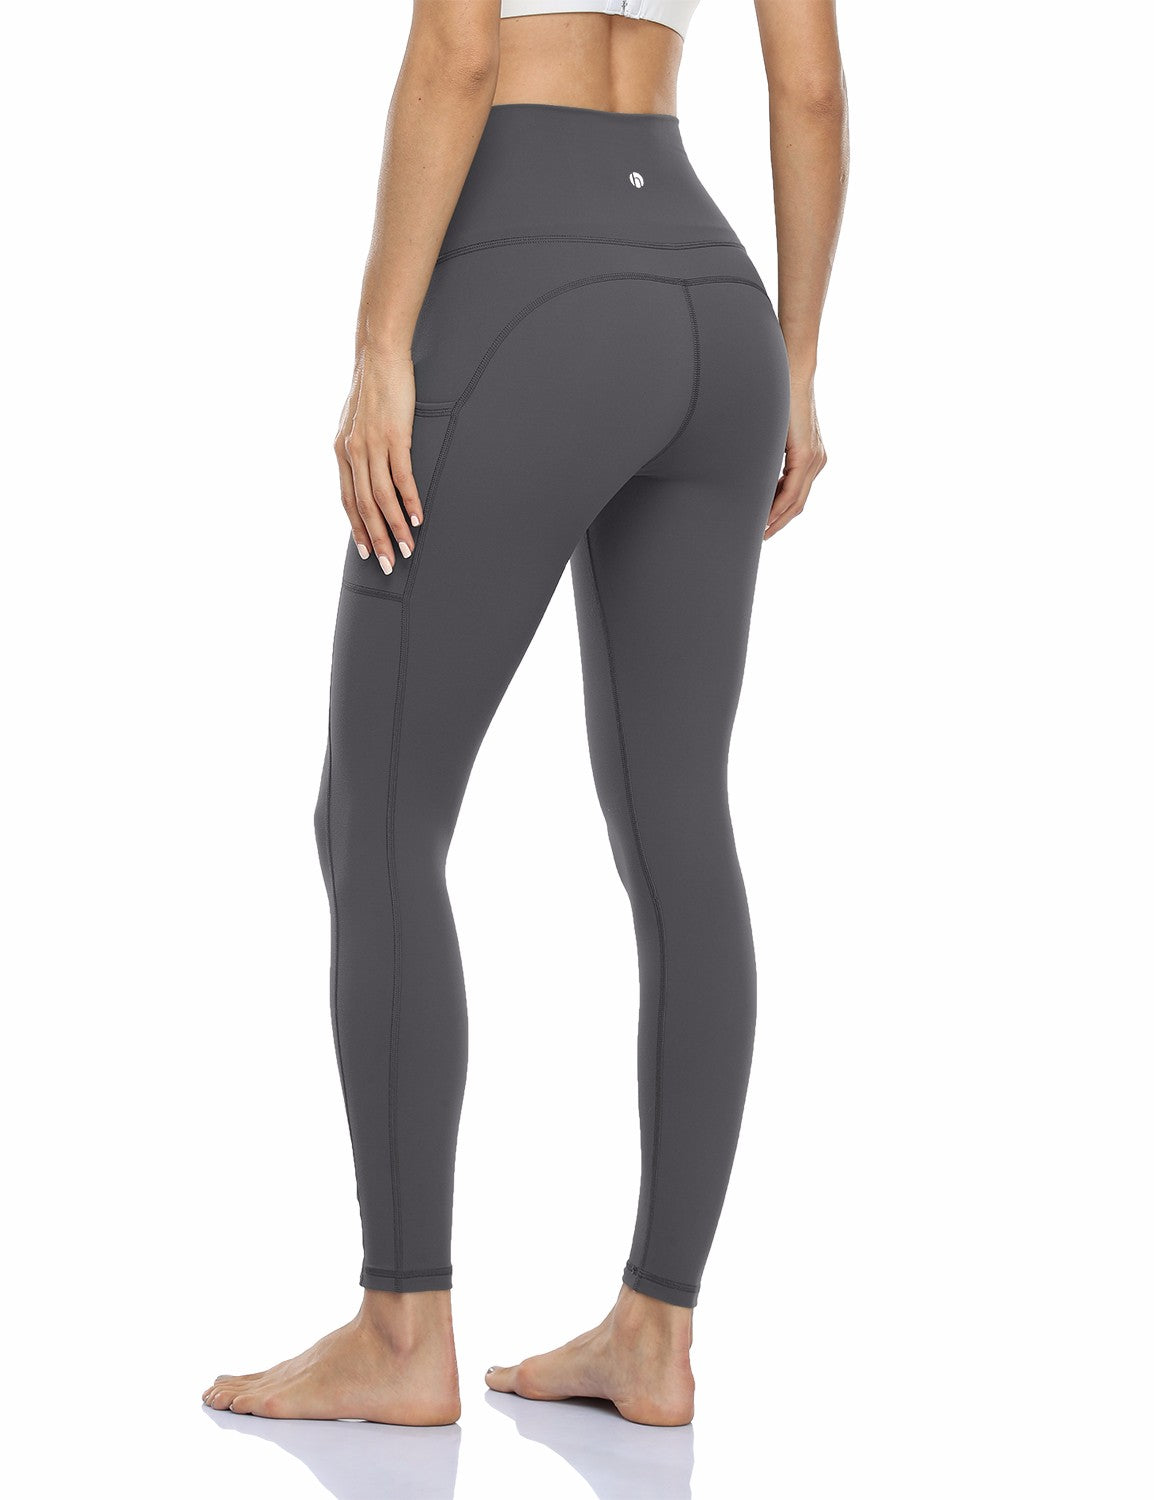 HeyNuts Essential High Waisted Workout Leggings Yoga Pants Ankle